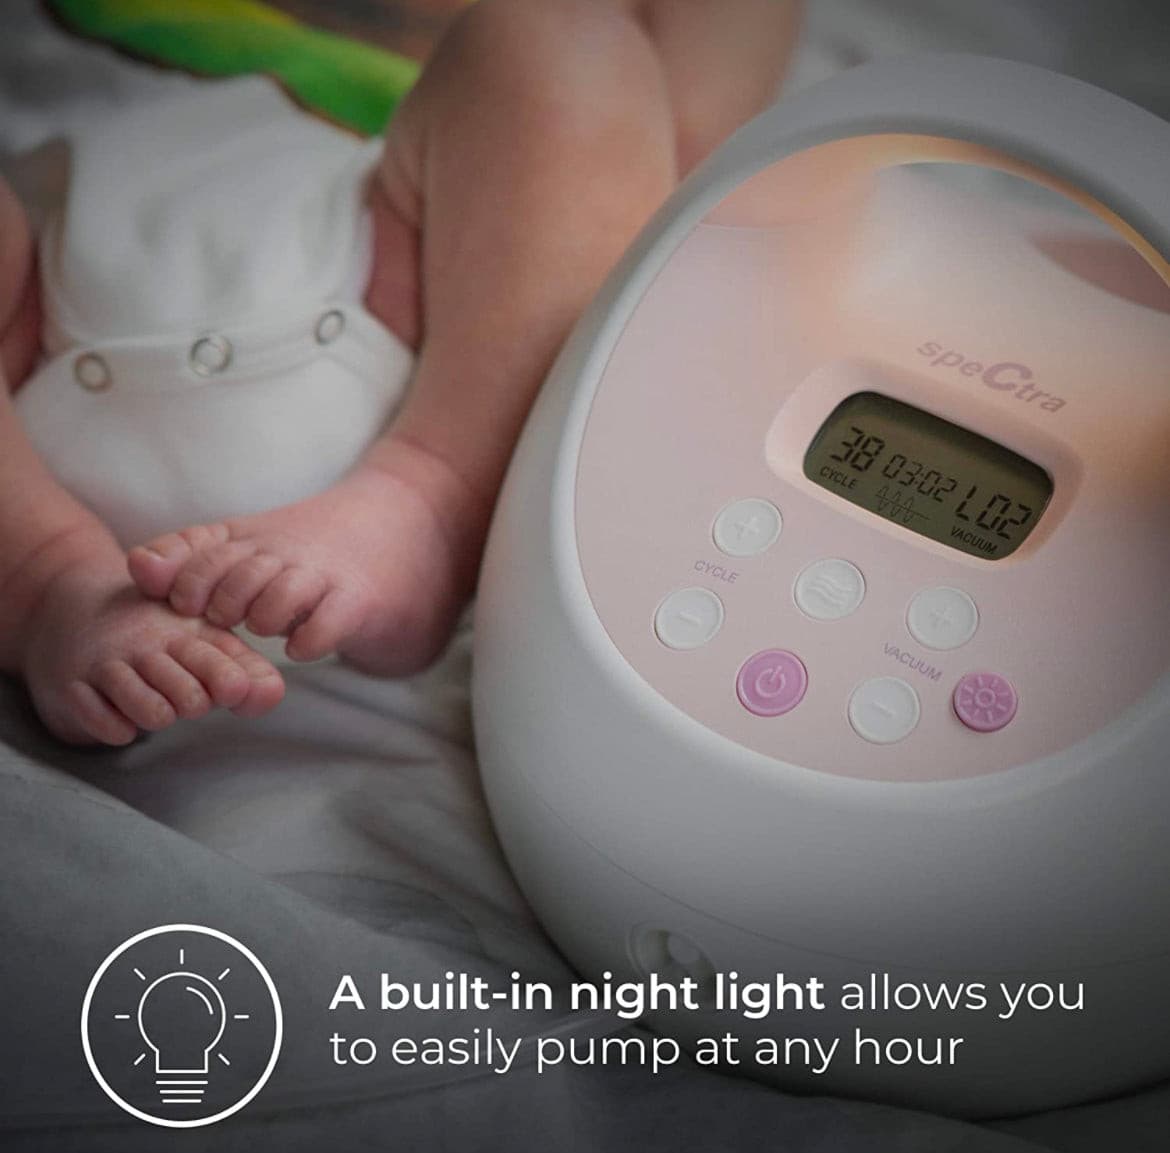 Spectra S2 Plus Hospital Grade Electric Breast Pump for Breastfeeding.